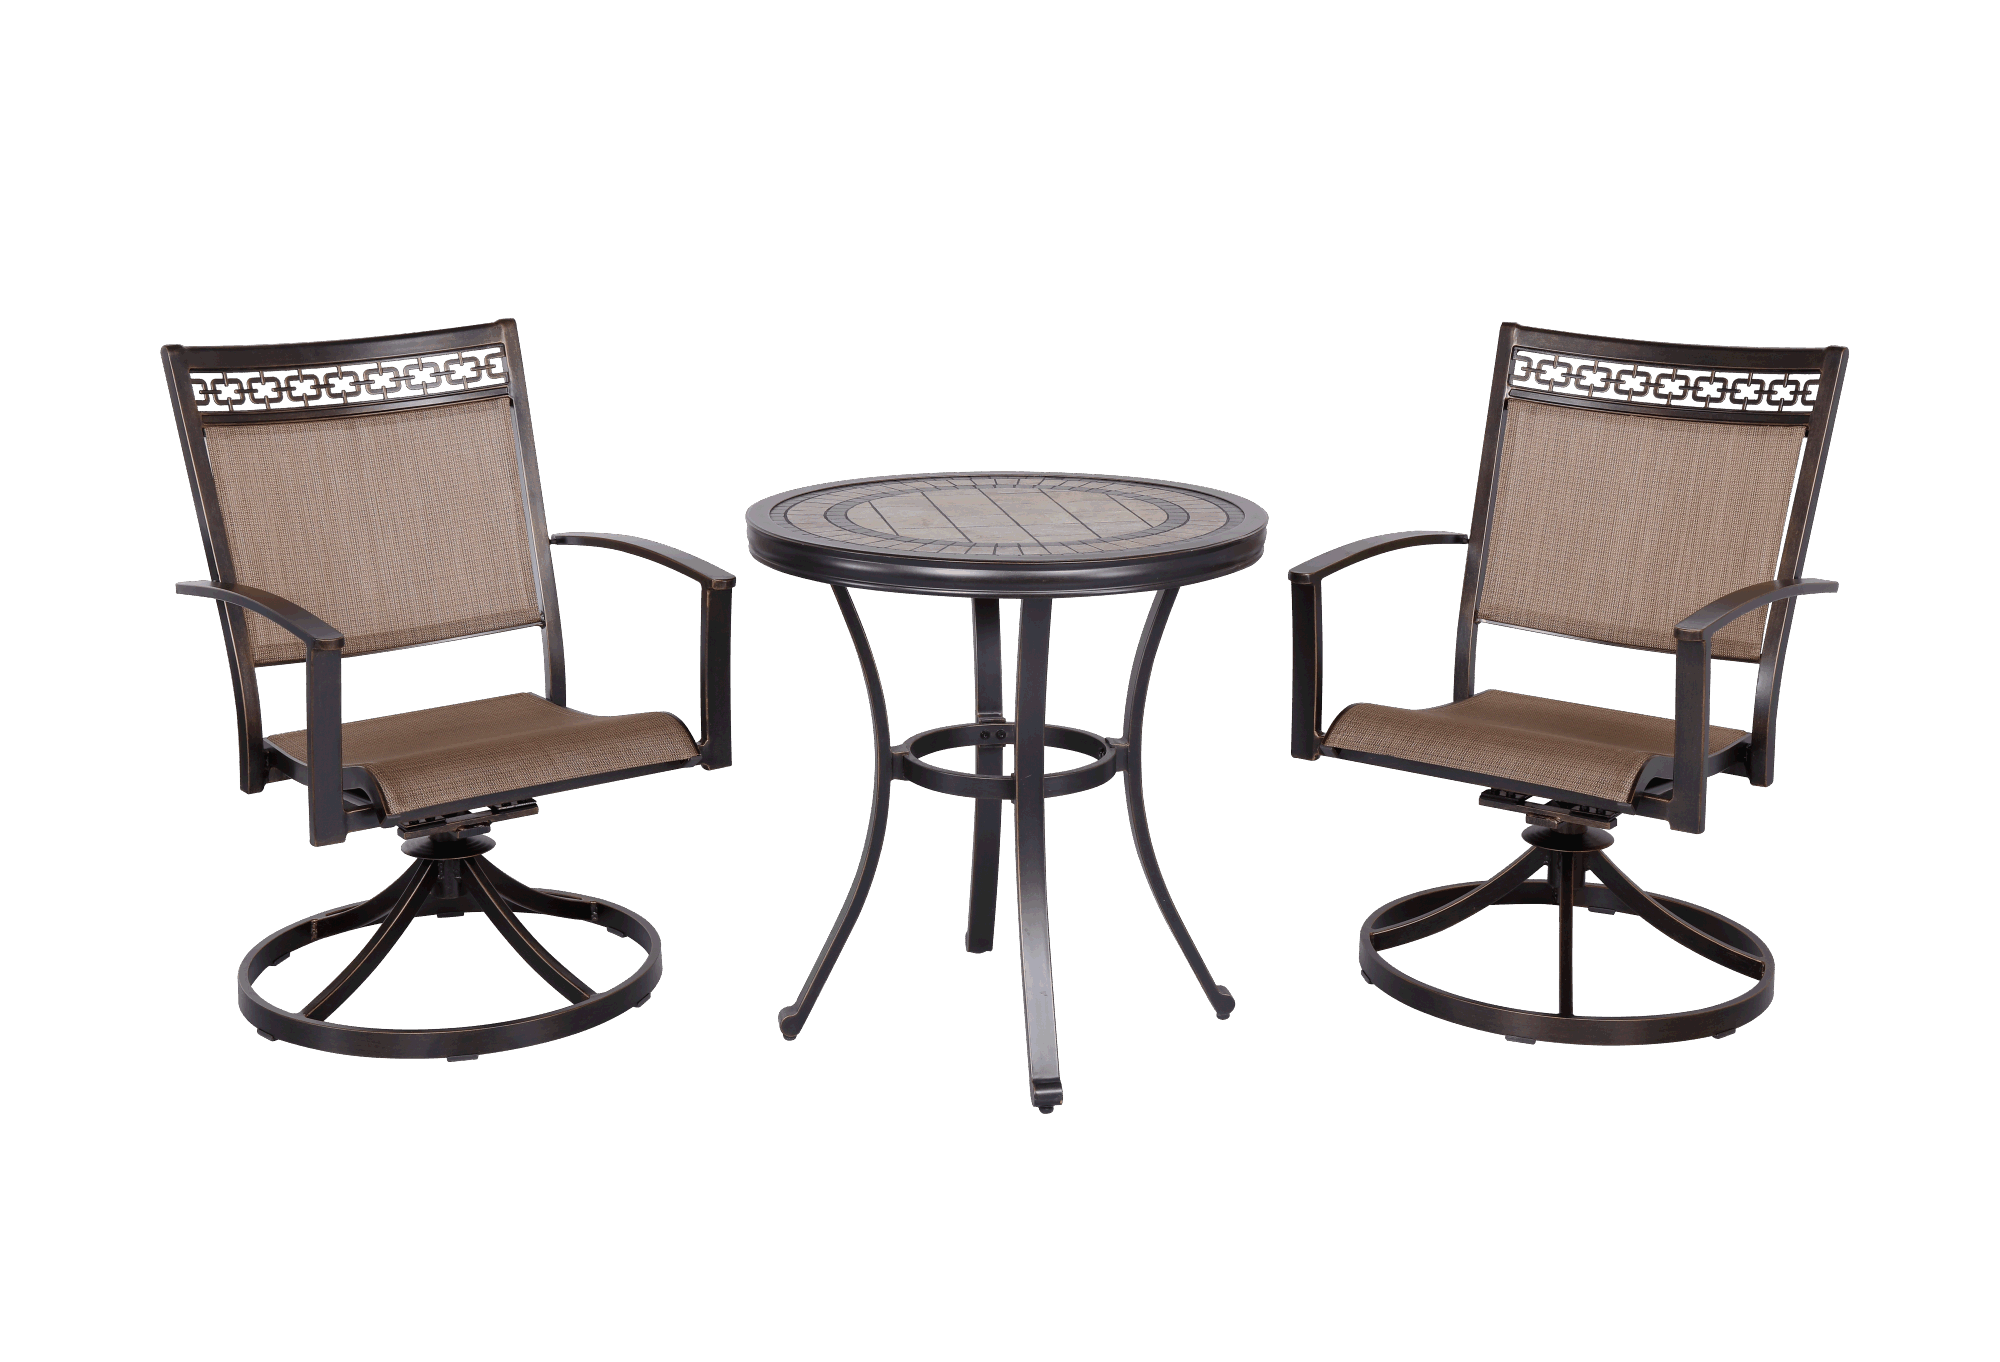 3 Piece Bistro Set w/ Porcelain Top Dining Table & Swivel Rocker Chairs